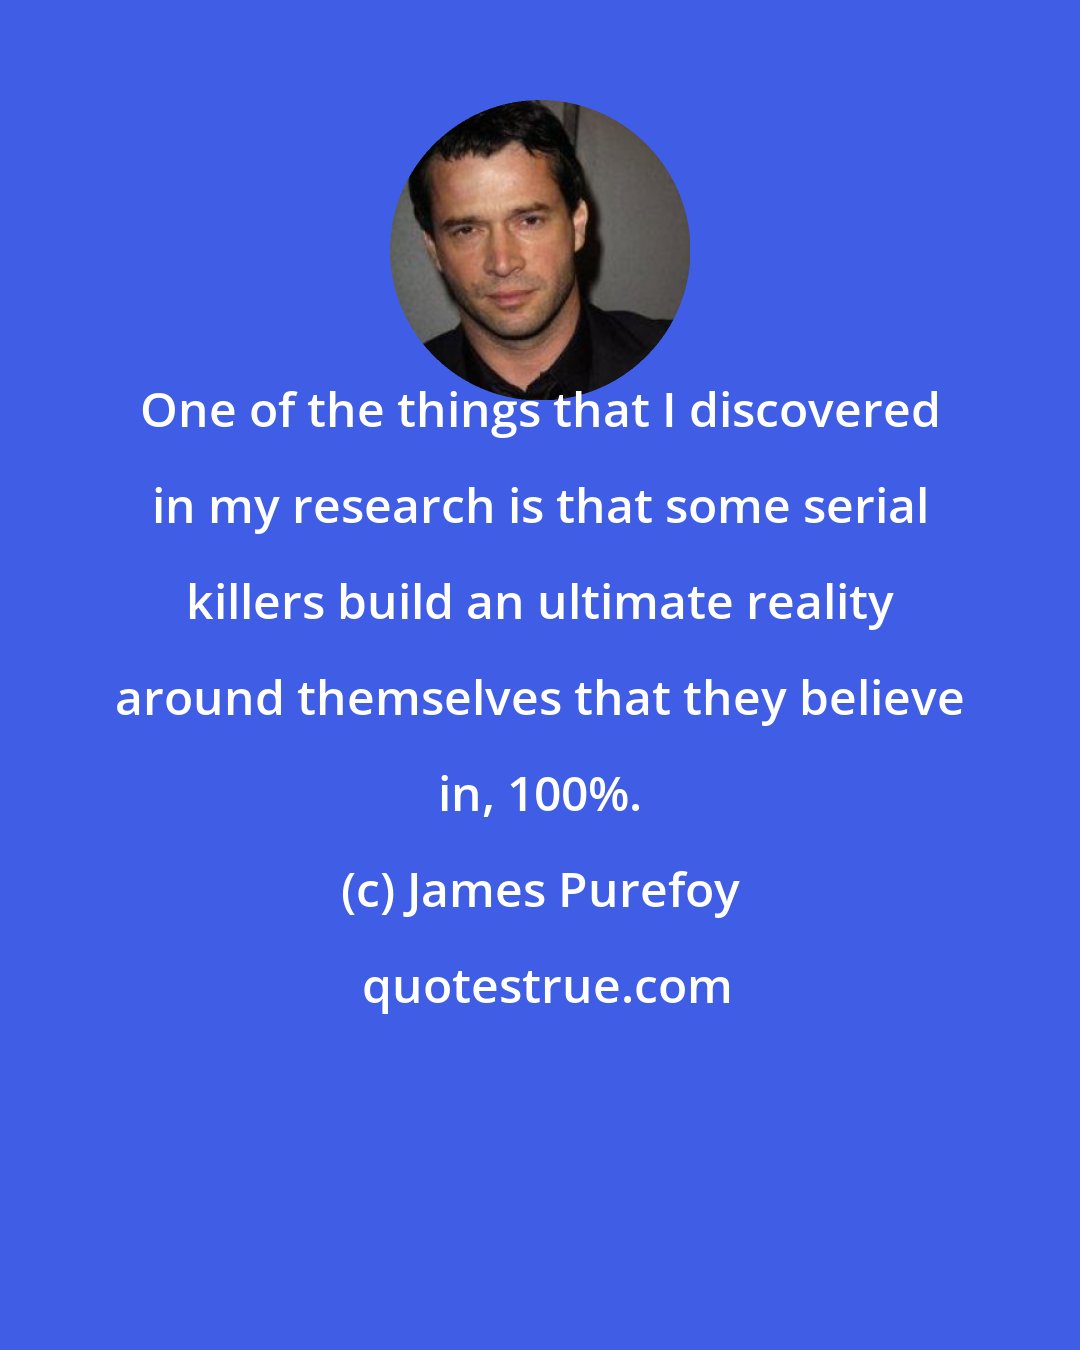 James Purefoy: One of the things that I discovered in my research is that some serial killers build an ultimate reality around themselves that they believe in, 100%.